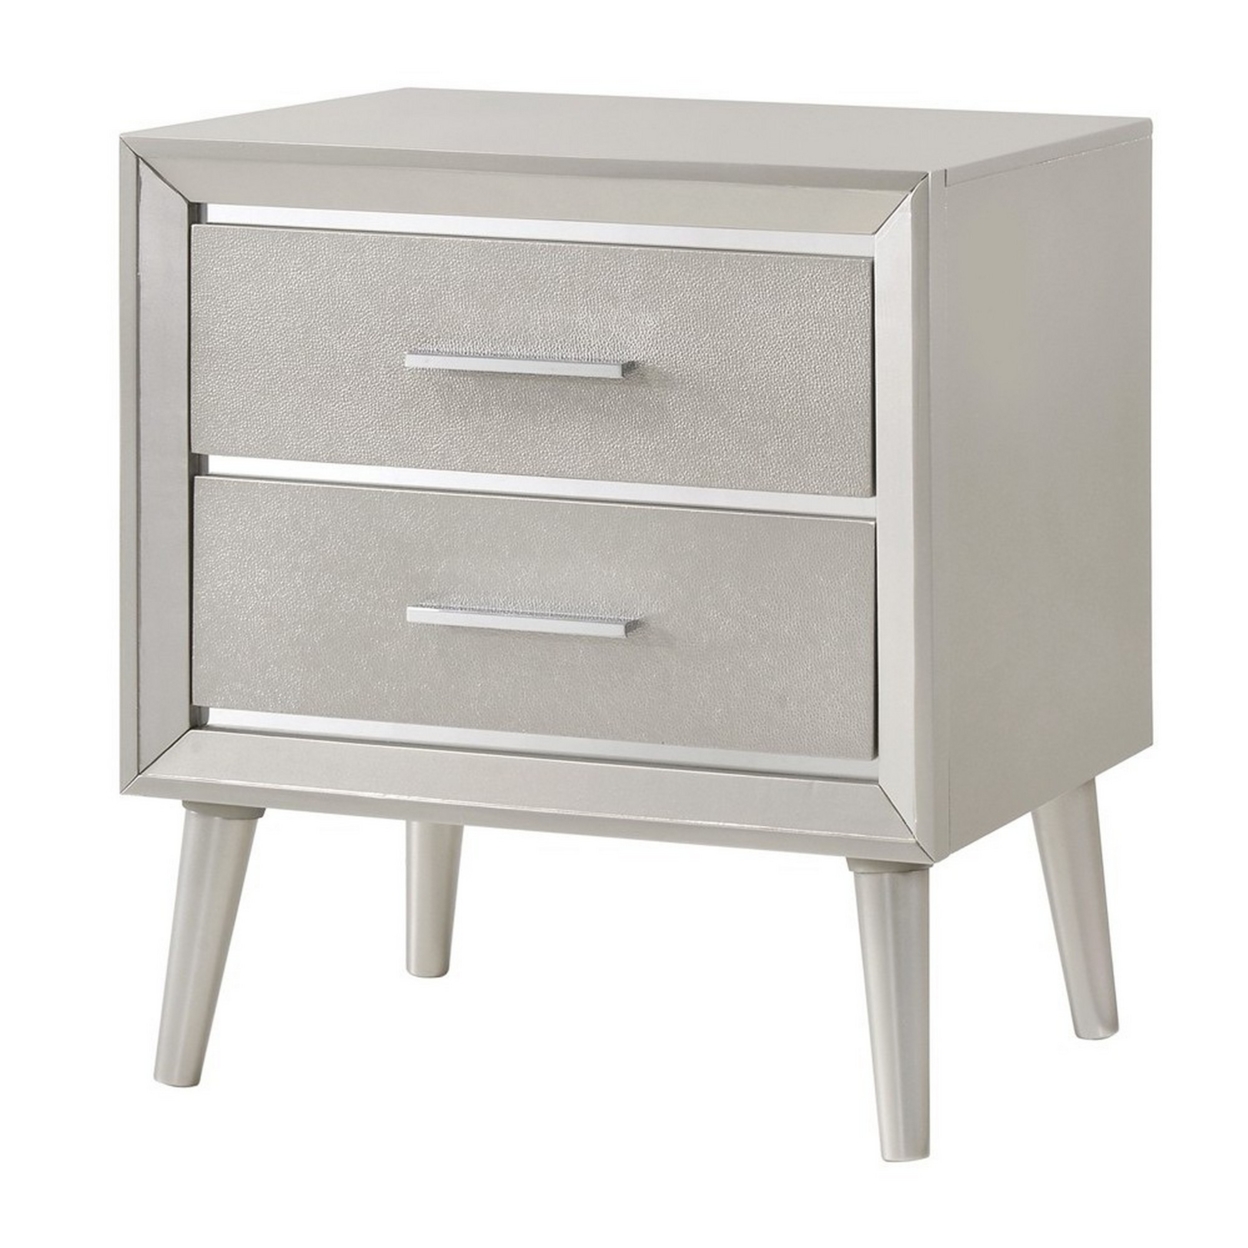 2 Drawer Contemporary Nightstand With Bar Handles And Splayed Legs, Silver- Saltoro Sherpi